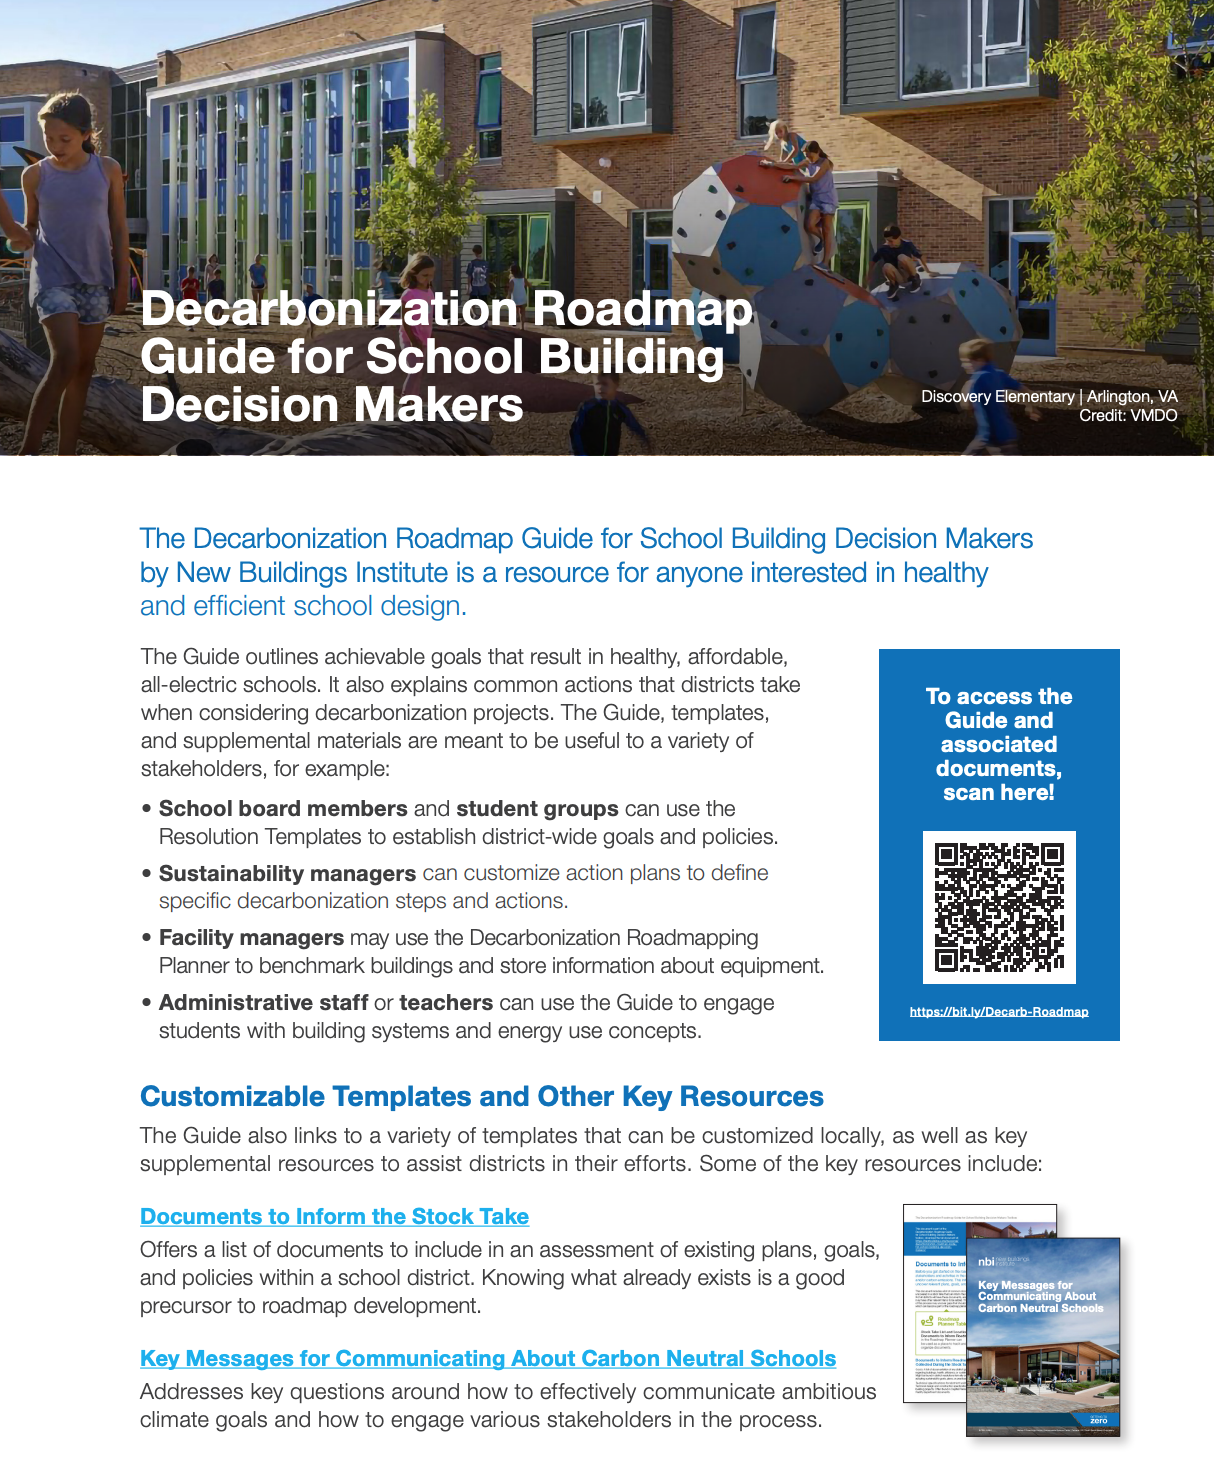 Handout with guidance title: Decarb Building Guide Roadmap for Decision Makers